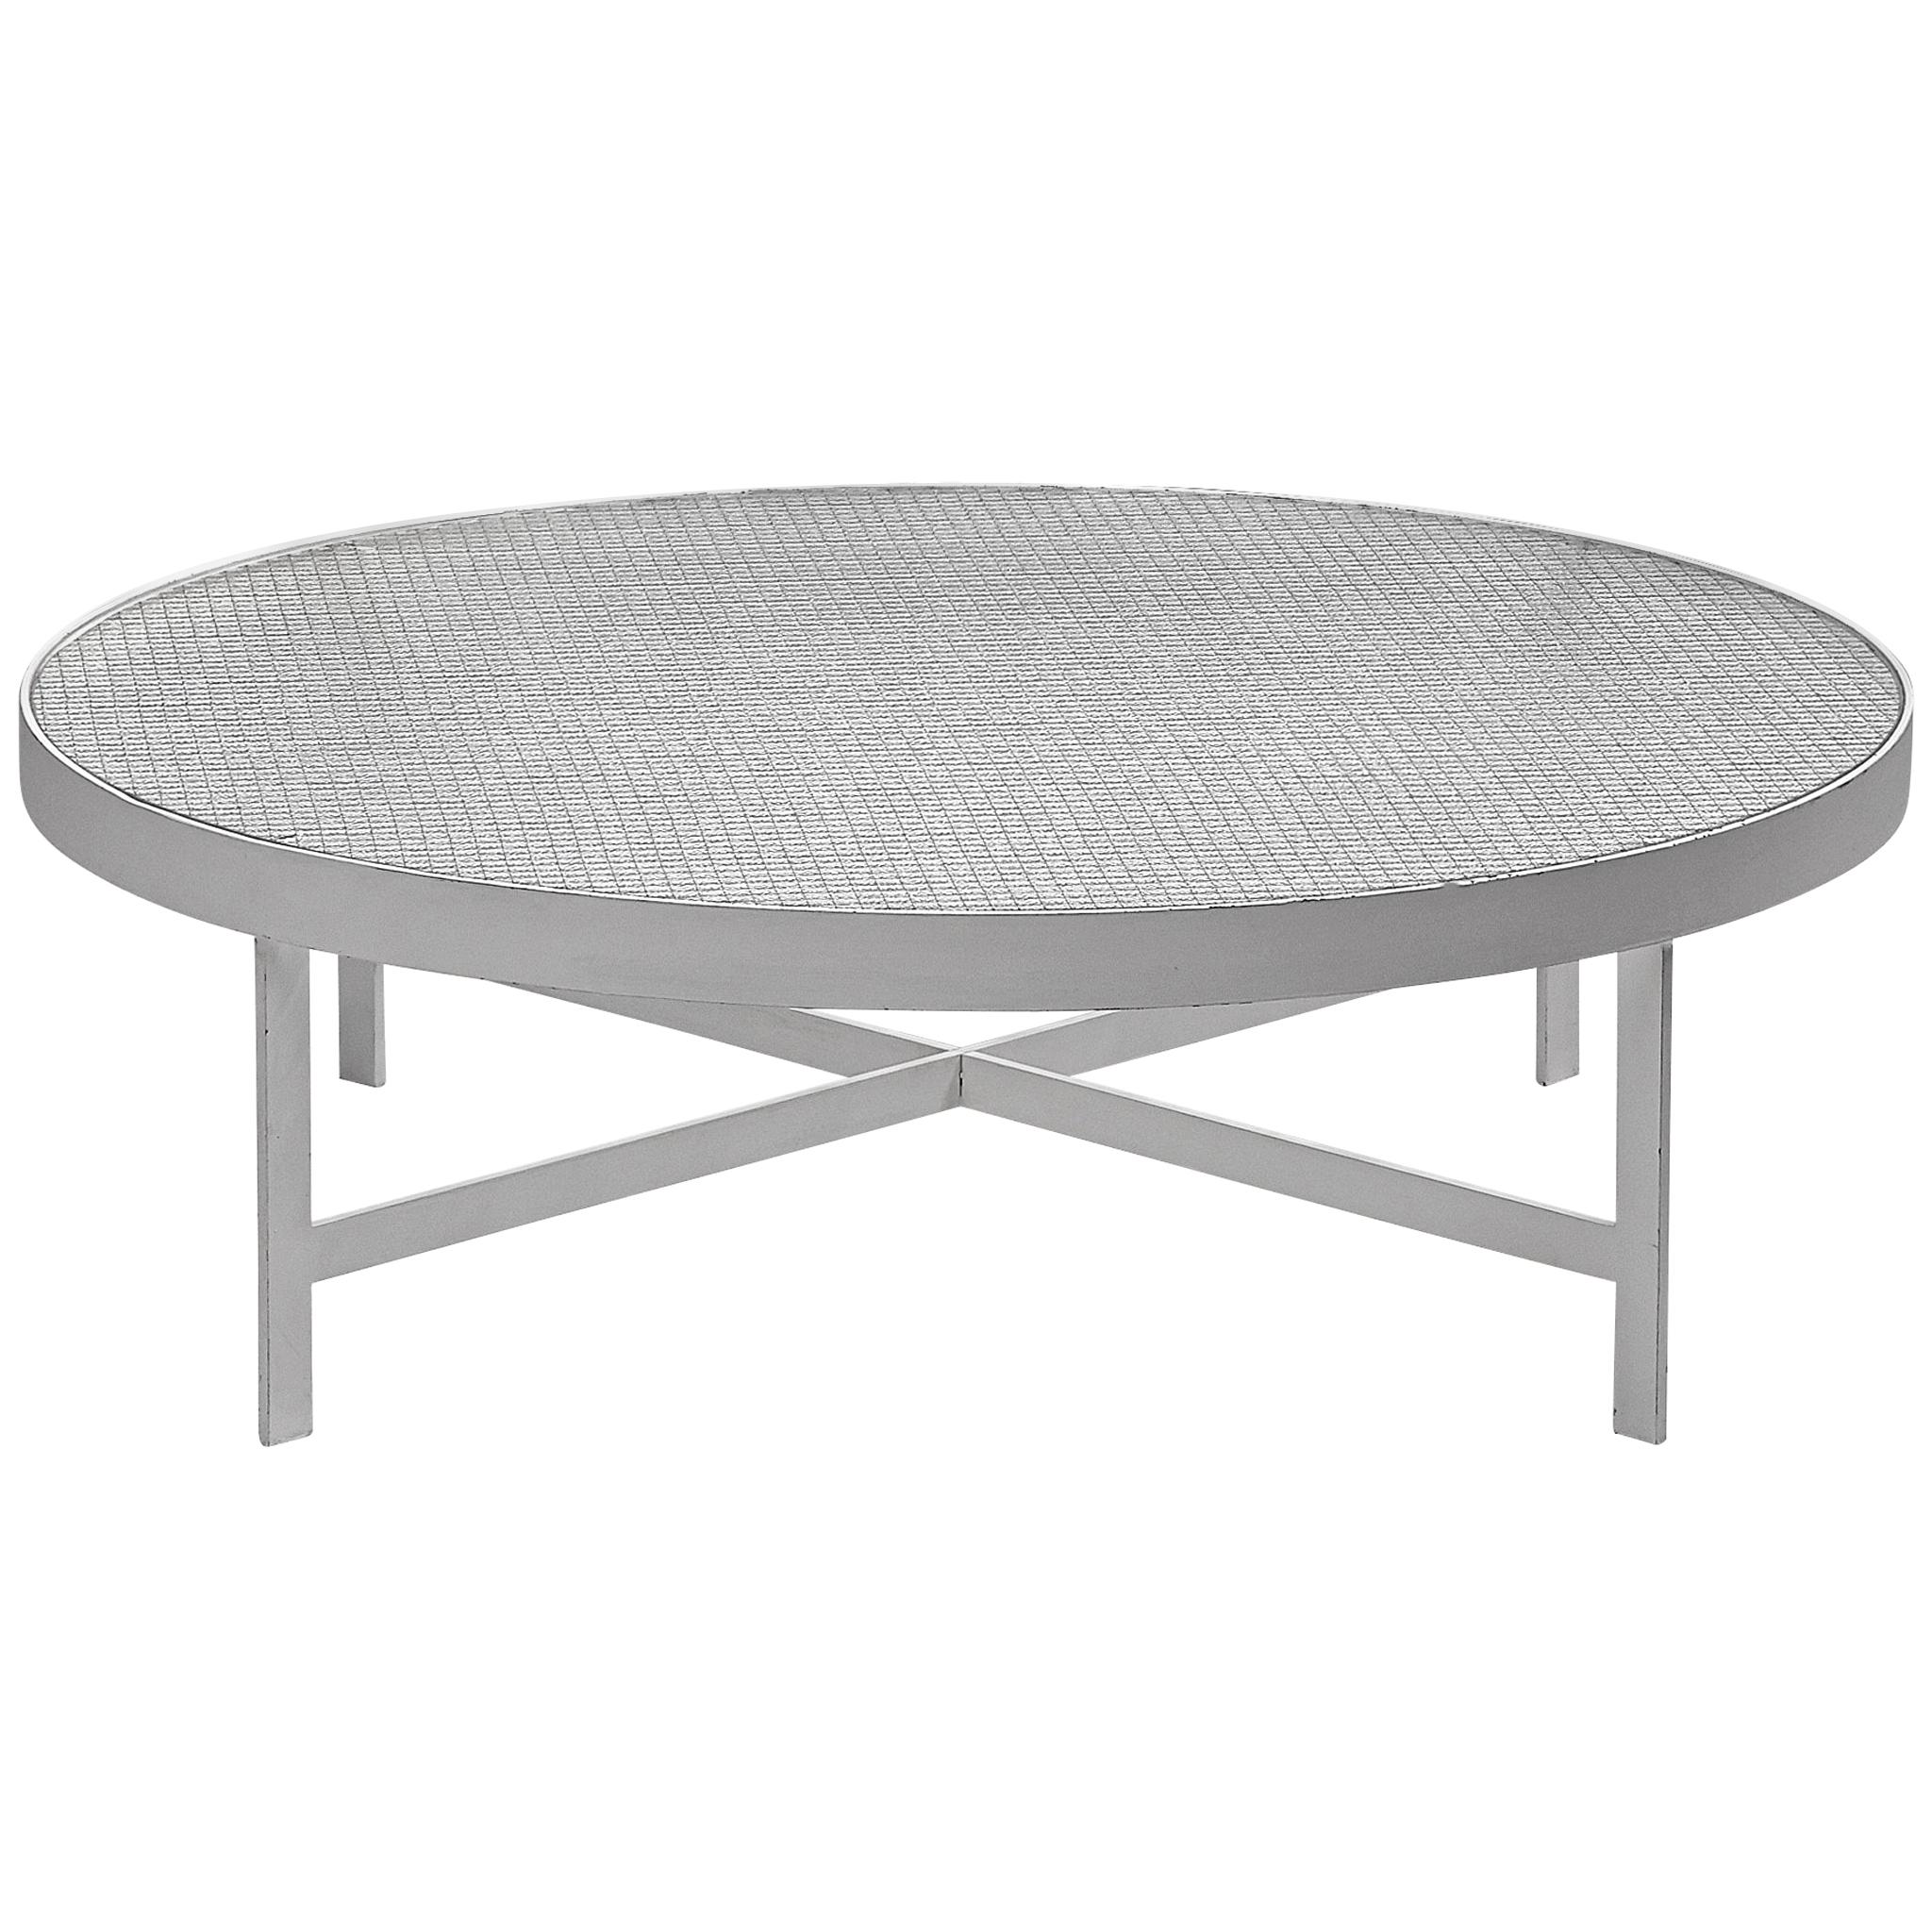 Janni Van Pelt Round Coffee Table in Metal and Glass